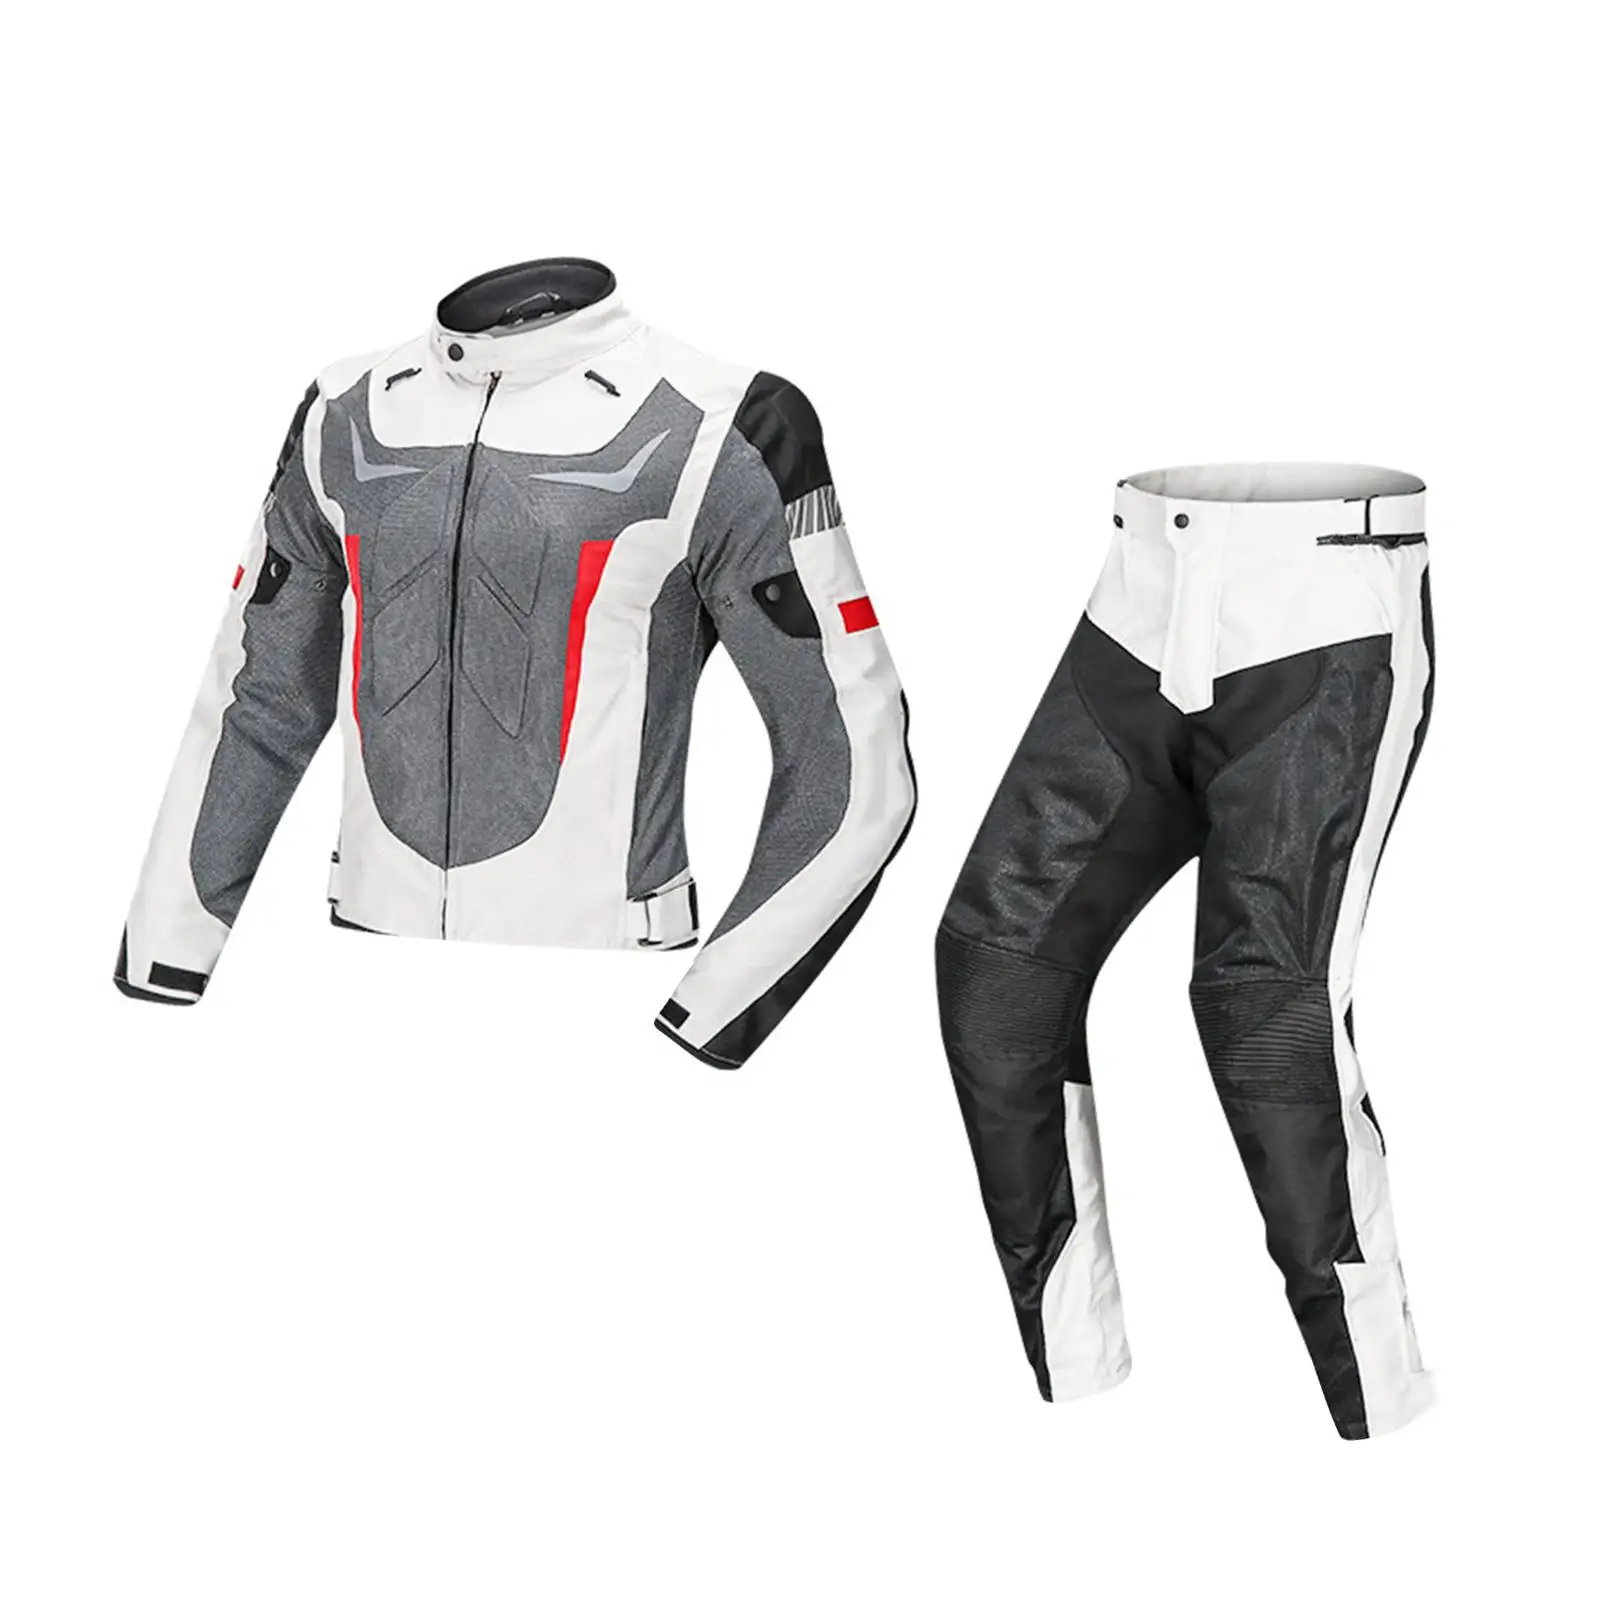 Riding Jacket Durable Men Women Protective Pads Motorcycle Jacket and Pants